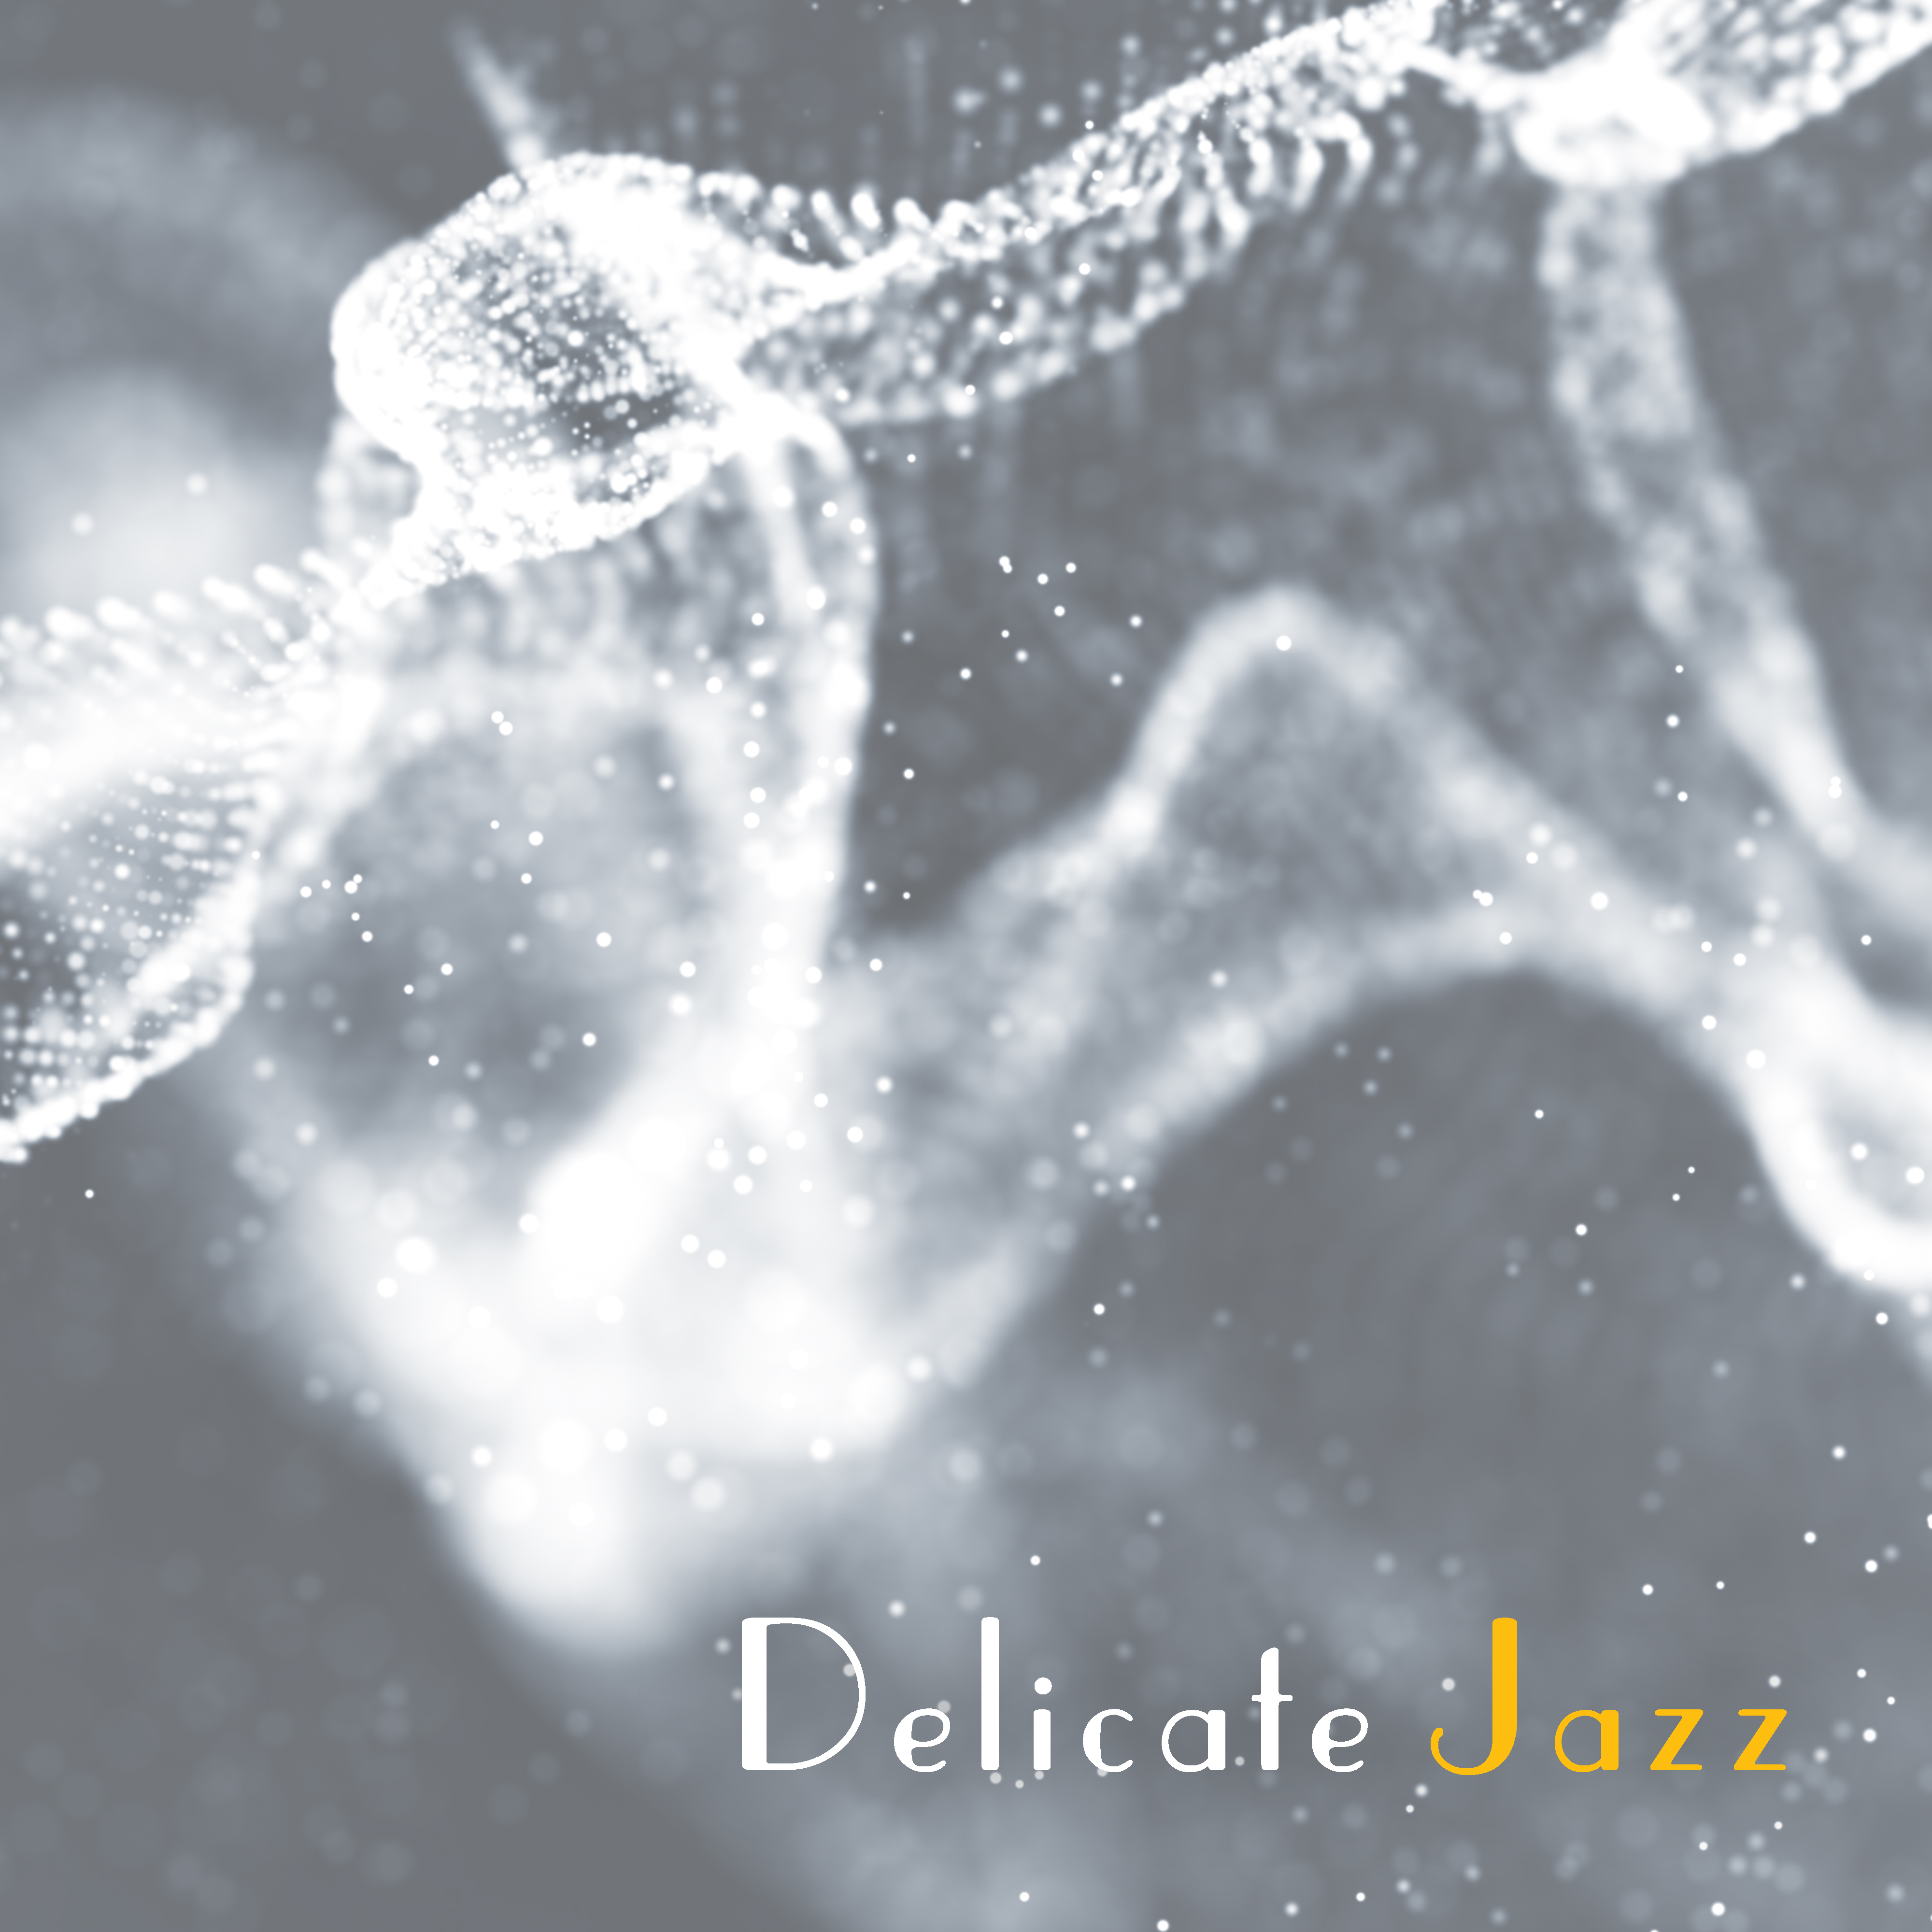 Delicate Jazz – Soft Melodies to Rest, Mellow Jazz, Instrumental Songs, Calm Down, Peaceful Music